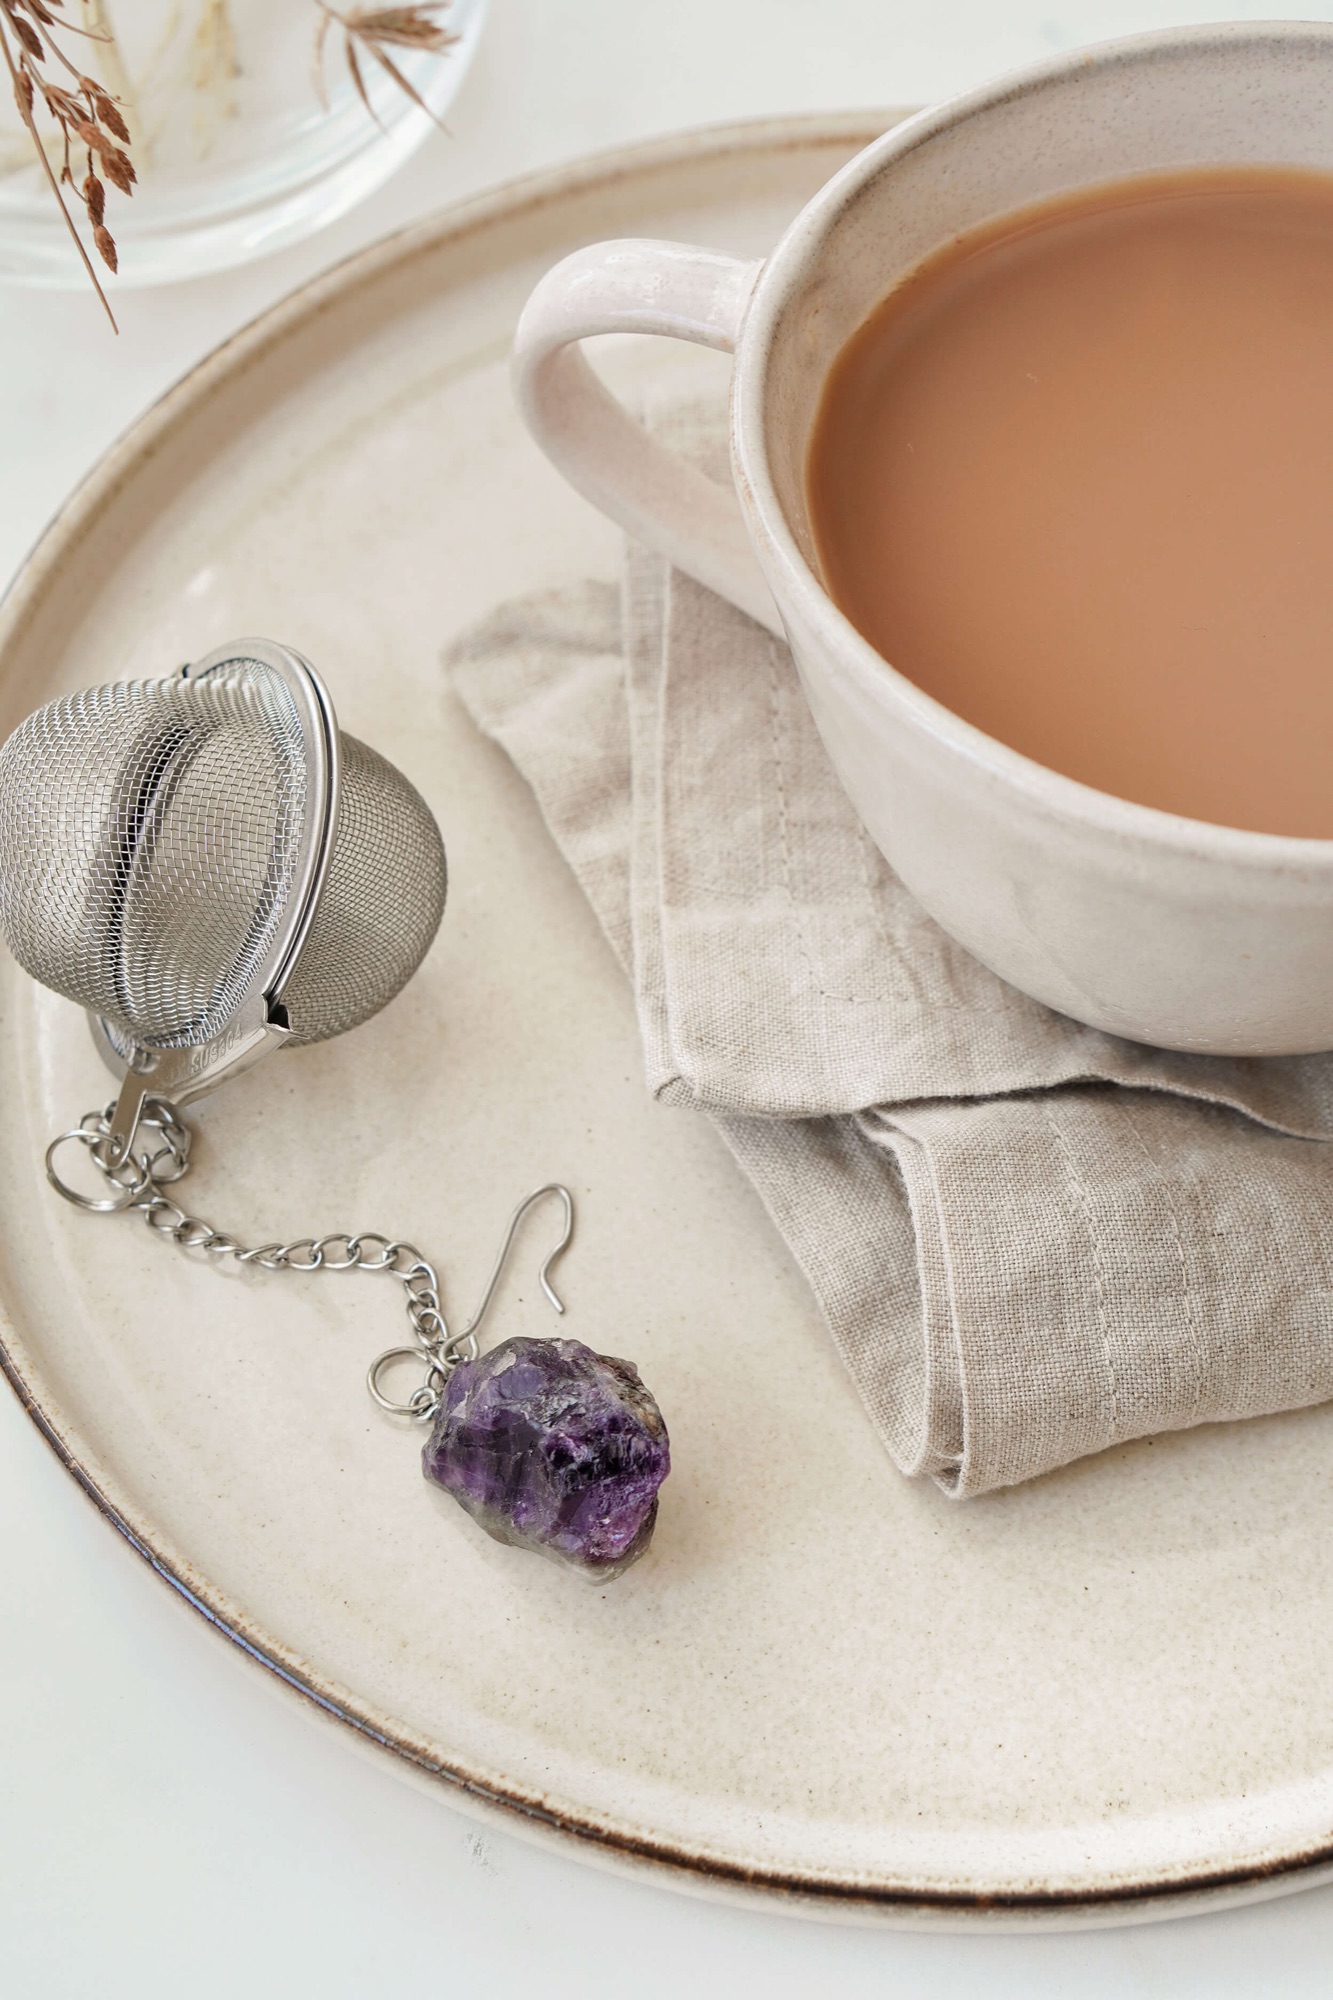 Learn About Amethyst Tea Strainer by Xander Kostroma